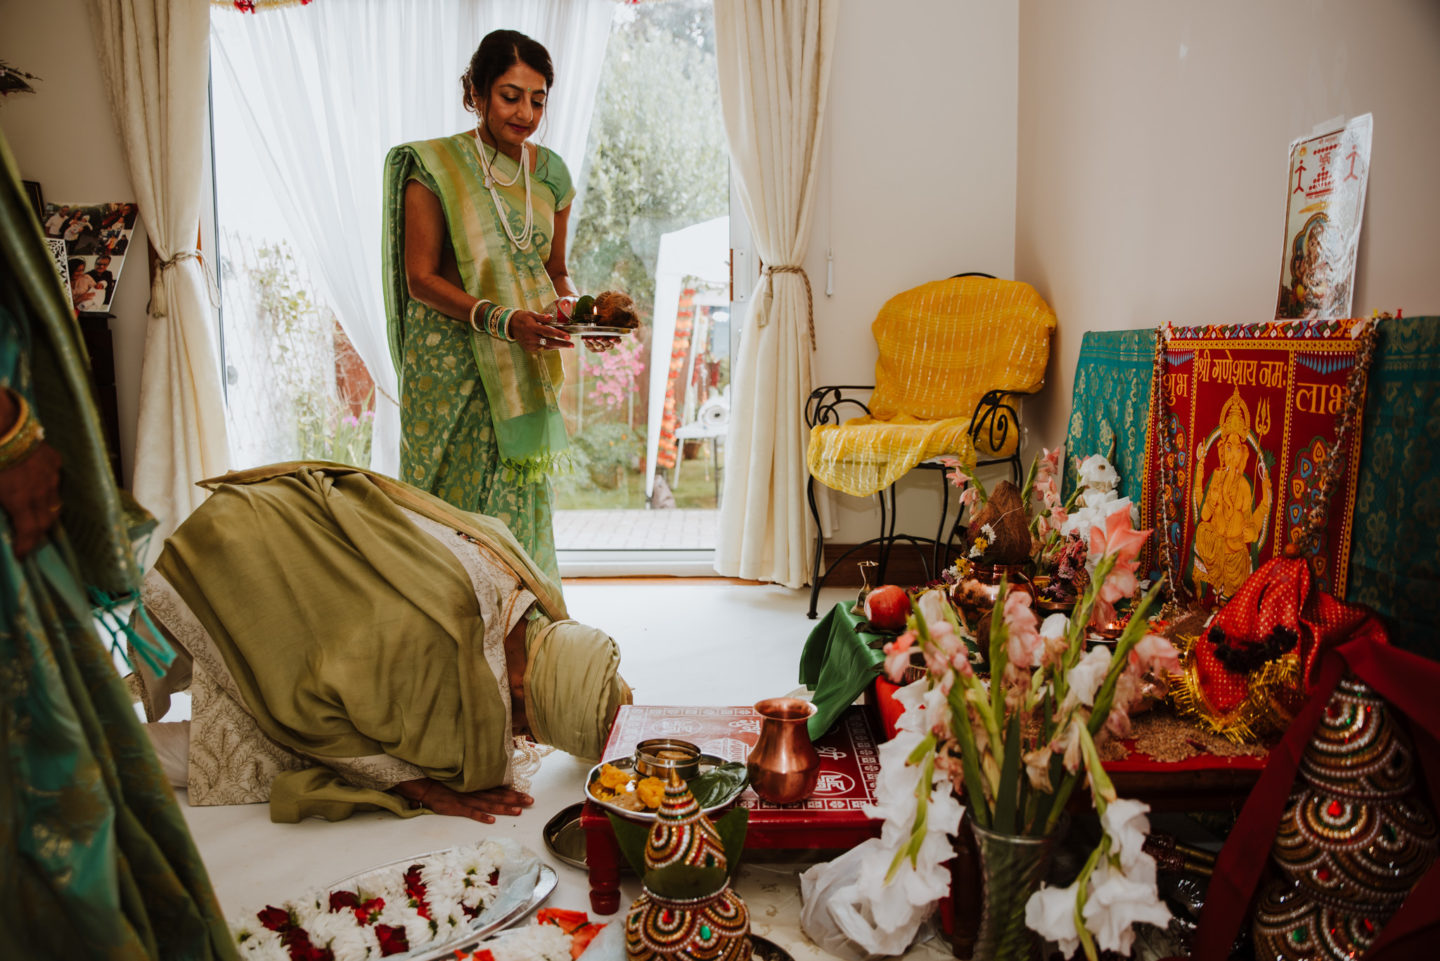 Multicultural Two Day Wedding With Traditional Indian Dress In West London